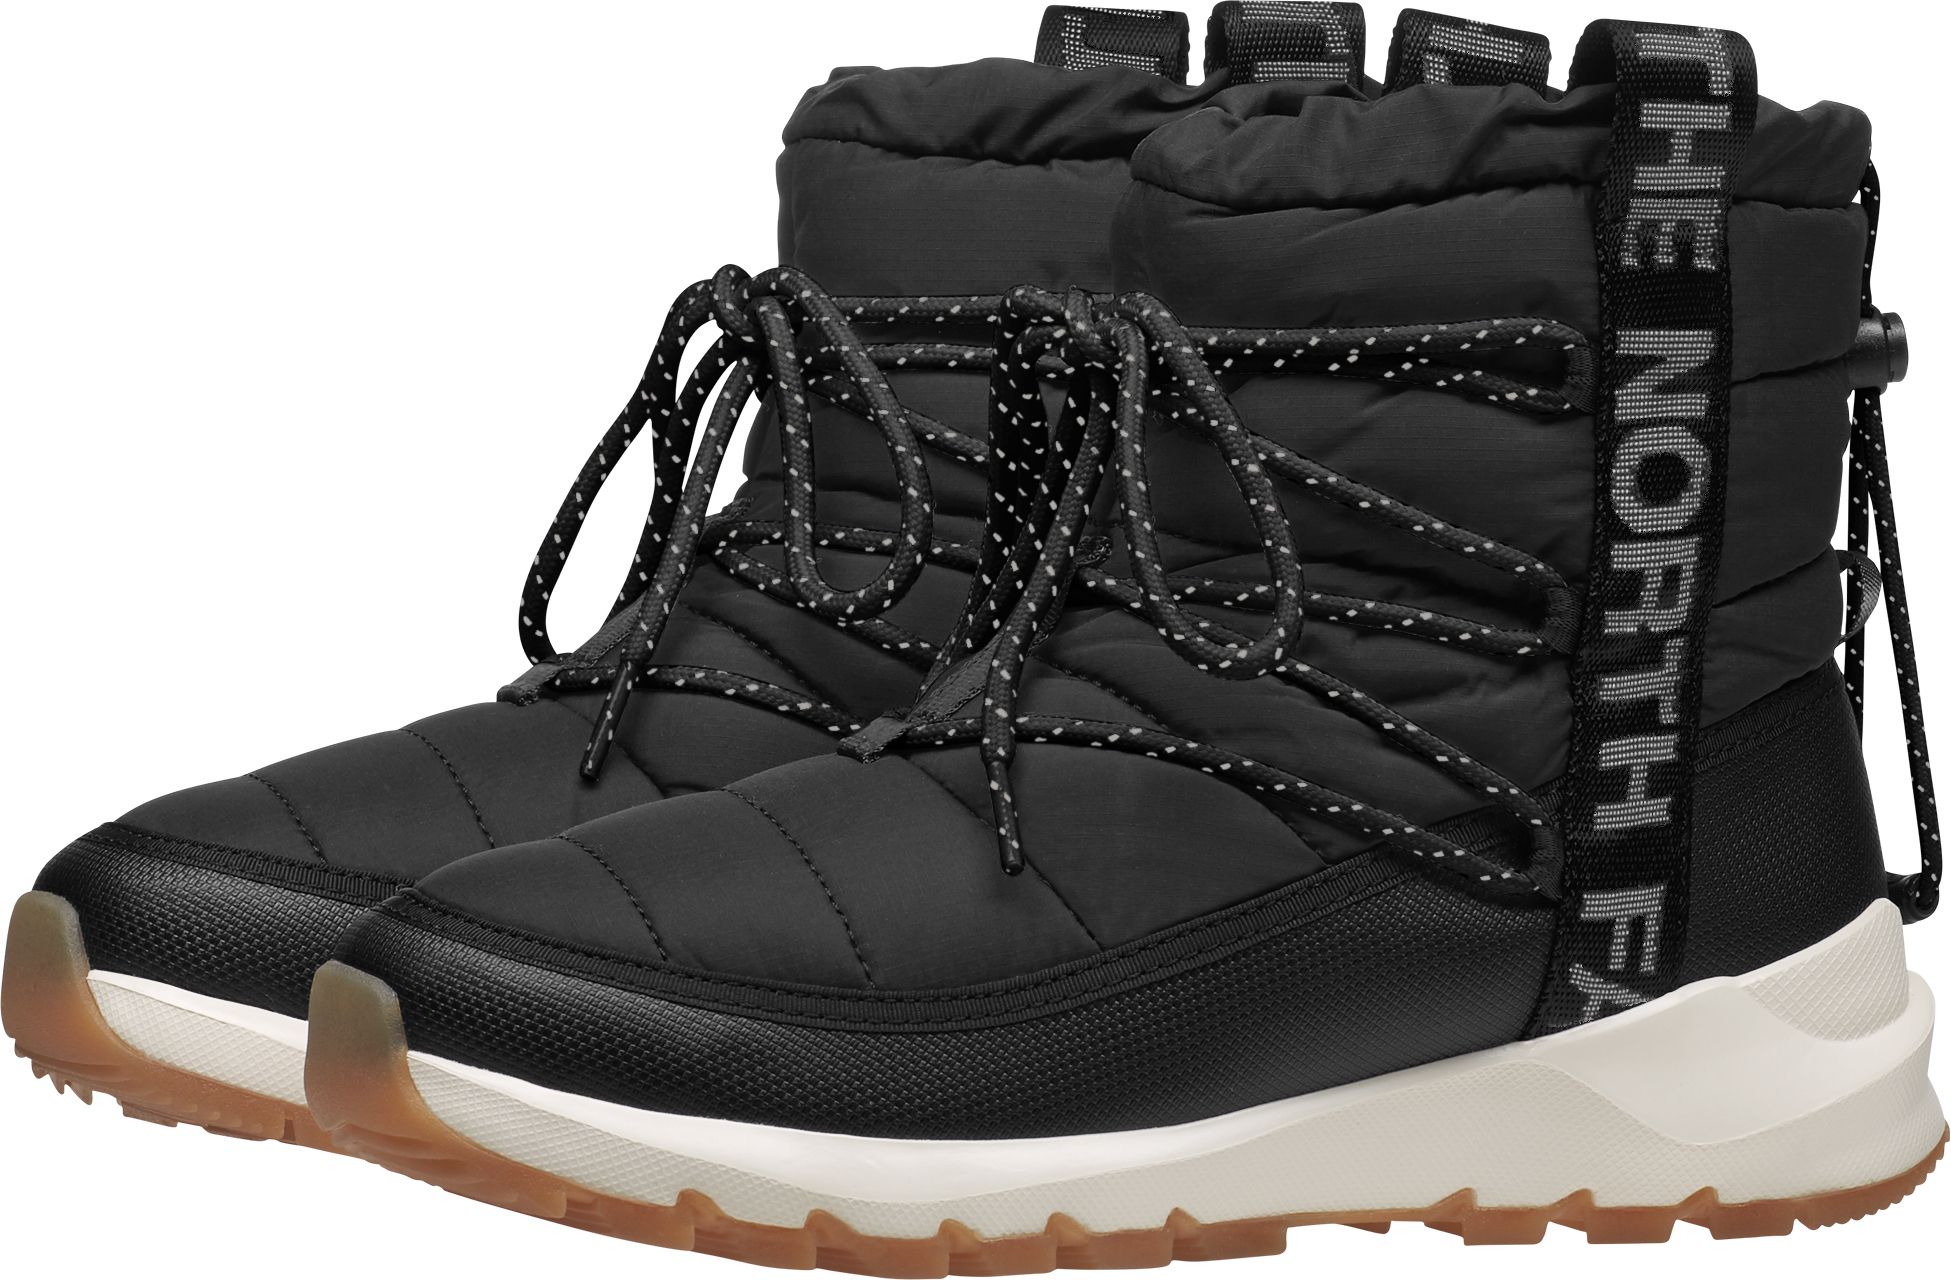 womens boots north face